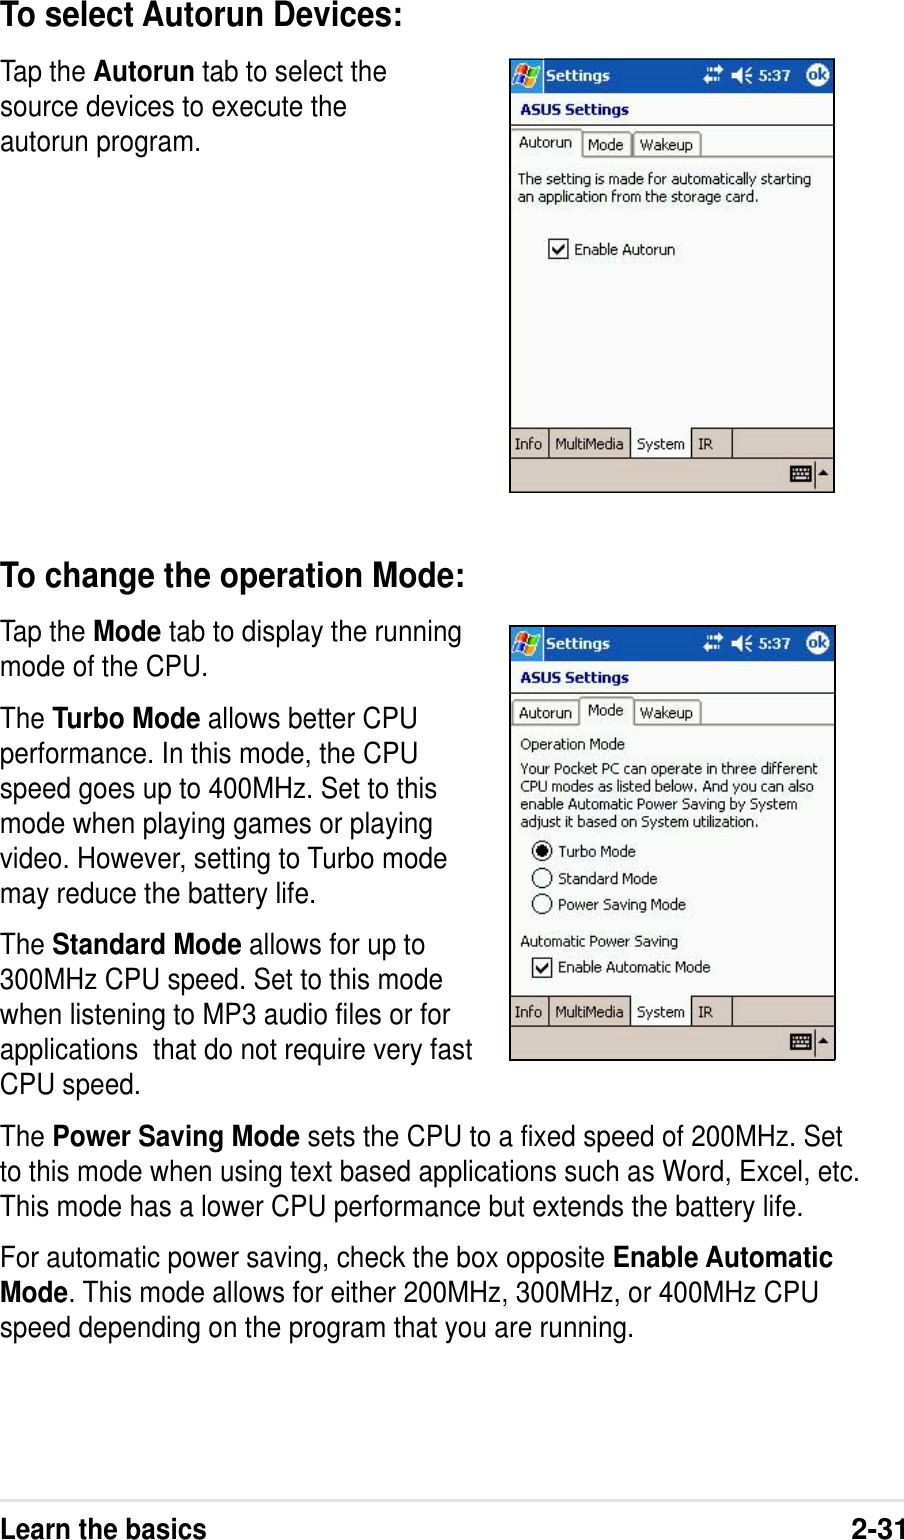 Learn the basics2-31To change the operation Mode:Tap the Mode tab to display the runningmode of the CPU.The Turbo Mode allows better CPUperformance. In this mode, the CPUspeed goes up to 400MHz. Set to thismode when playing games or playingvideo. However, setting to Turbo modemay reduce the battery life.The Standard Mode allows for up to300MHz CPU speed. Set to this modewhen listening to MP3 audio files or forapplications  that do not require very fastCPU speed.The Power Saving Mode sets the CPU to a fixed speed of 200MHz. Setto this mode when using text based applications such as Word, Excel, etc.This mode has a lower CPU performance but extends the battery life.For automatic power saving, check the box opposite Enable AutomaticMode. This mode allows for either 200MHz, 300MHz, or 400MHz CPUspeed depending on the program that you are running.Tap the Autorun tab to select thesource devices to execute theautorun program.To select Autorun Devices: